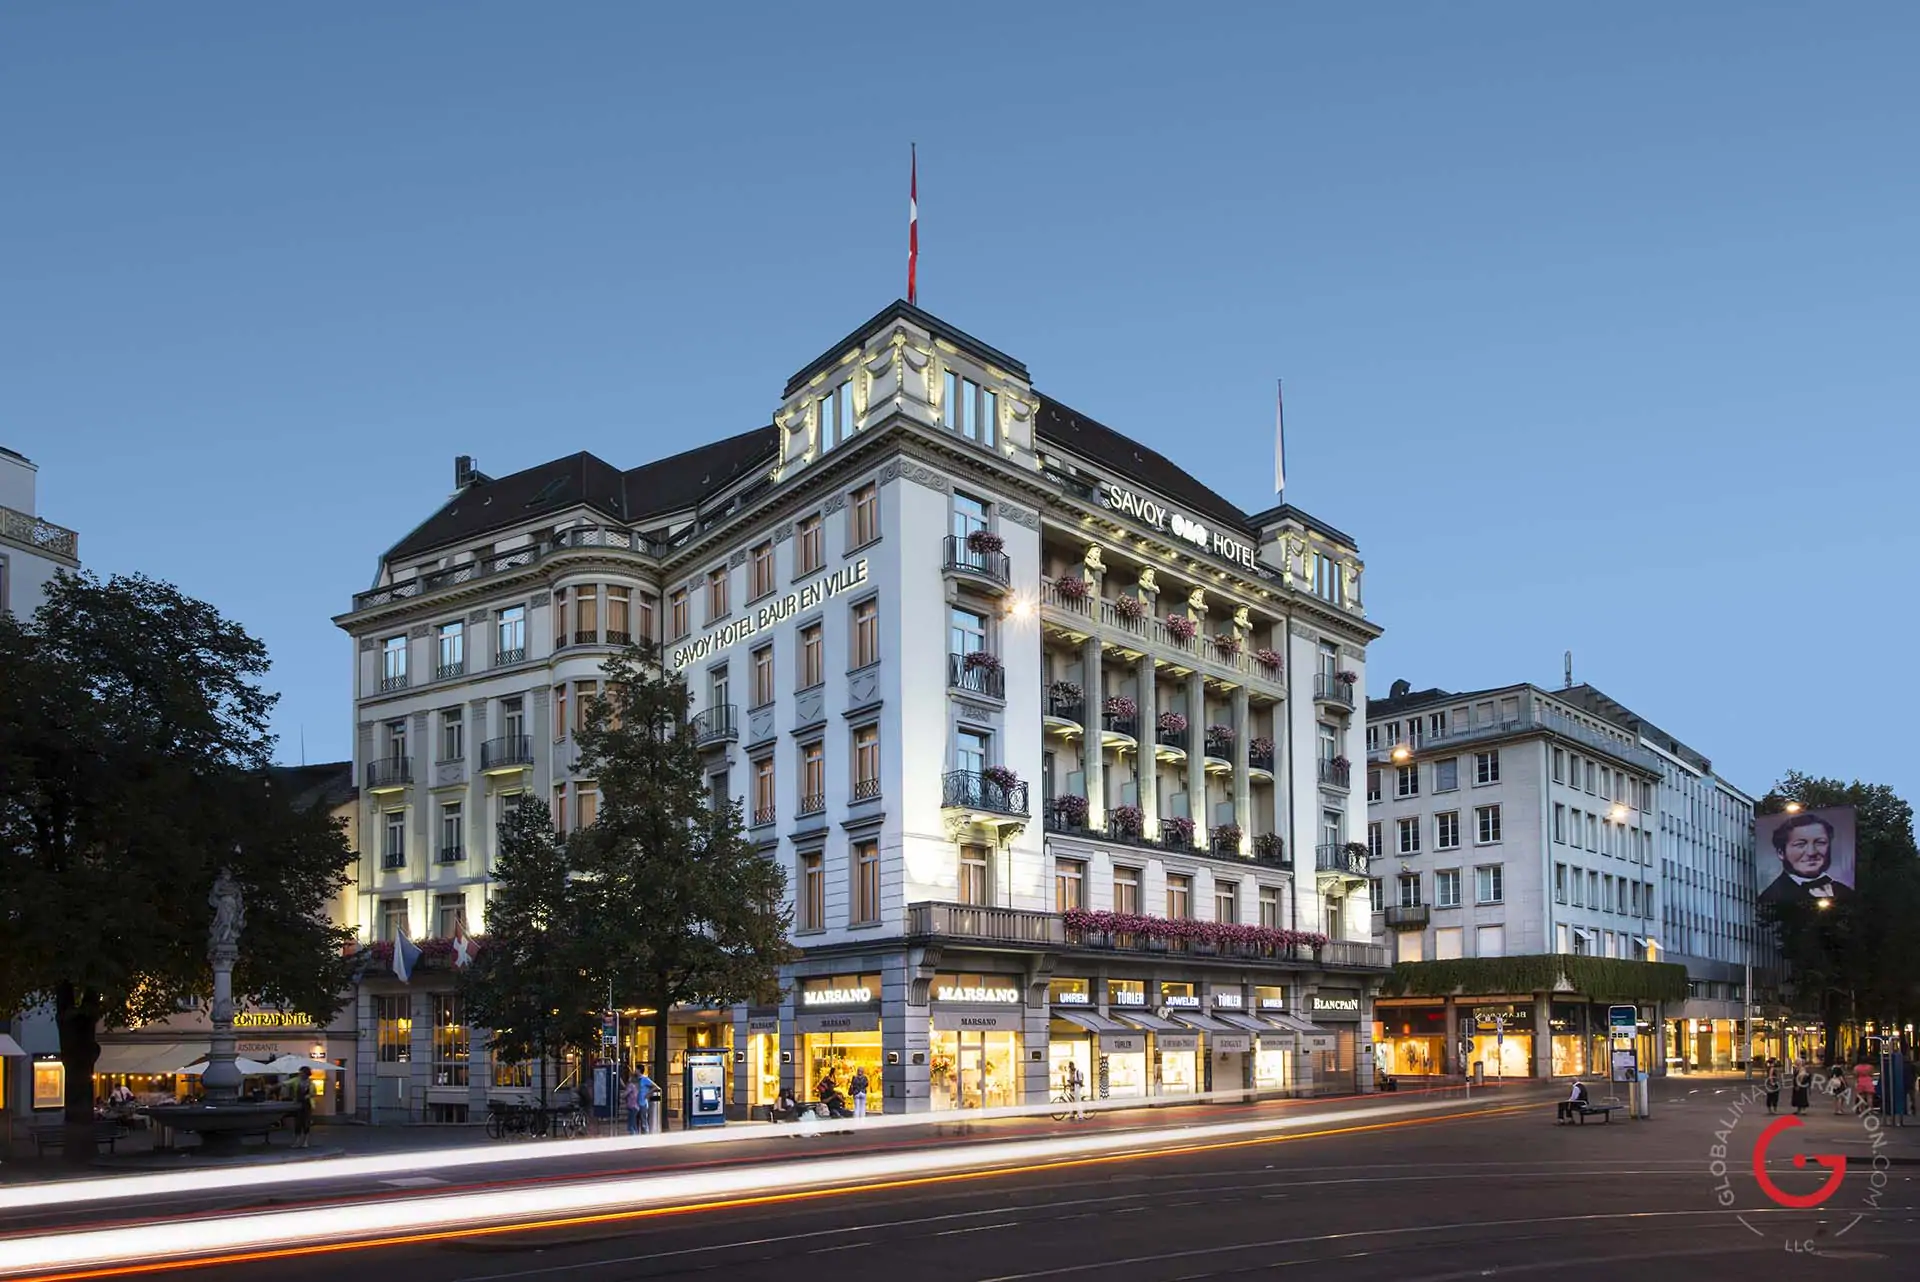 Savoy Hotel Zürich, Switzerland - Professional Architecture Photographer and Commercial Photography of Buildings